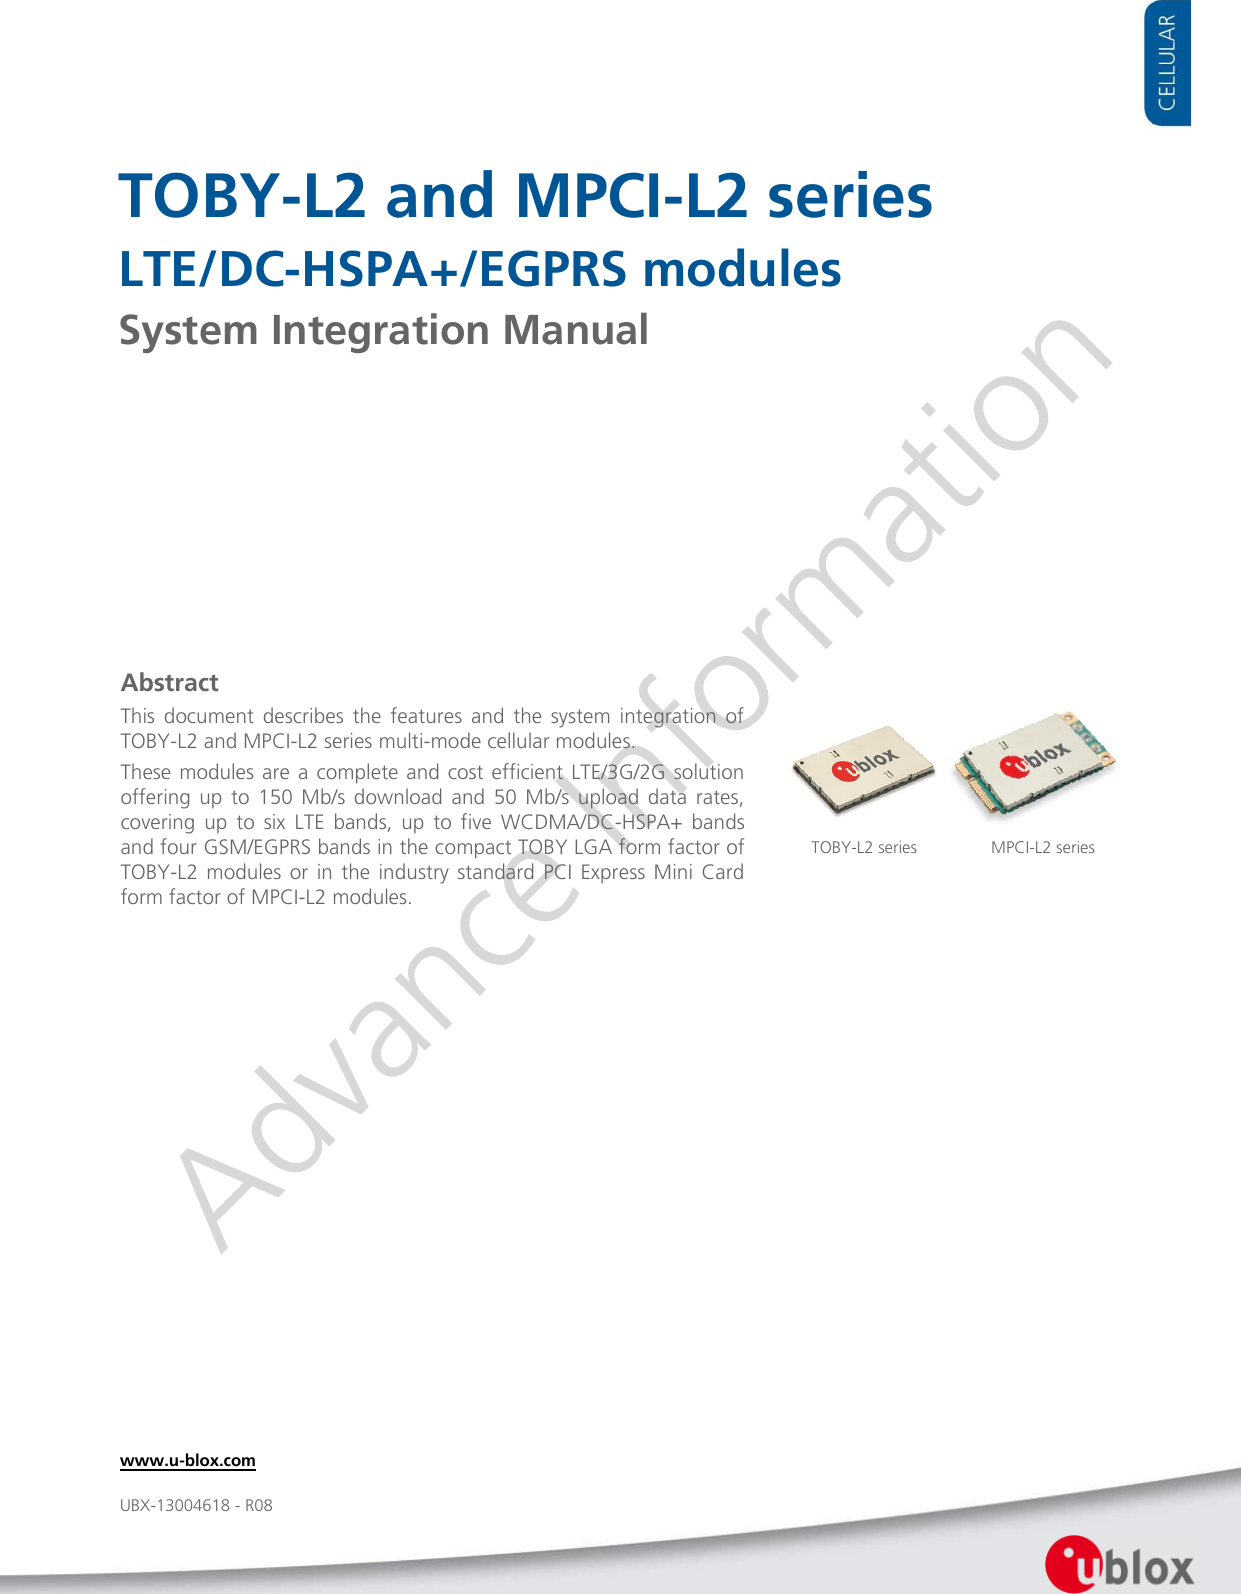     TOBY-L2 and MPCI-L2 series LTE/DC-HSPA+/EGPRS modules System Integration Manual               Abstract This  document  describes  the  features  and  the  system  integration  of TOBY-L2 and MPCI-L2 series multi-mode cellular modules. These modules are a complete and cost  efficient  LTE/3G/2G  solution offering  up  to  150  Mb/s  download  and  50  Mb/s  upload  data  rates, covering  up  to  six  LTE  bands,  up  to  five  WCDMA/DC-HSPA+  bands and four GSM/EGPRS bands in the compact TOBY LGA form factor of TOBY-L2  modules  or  in  the  industry standard  PCI  Express Mini  Card form factor of MPCI-L2 modules. TOBY-L2 series  www.u-blox.com UBX-13004618 - R08 MPCI-L2 series  